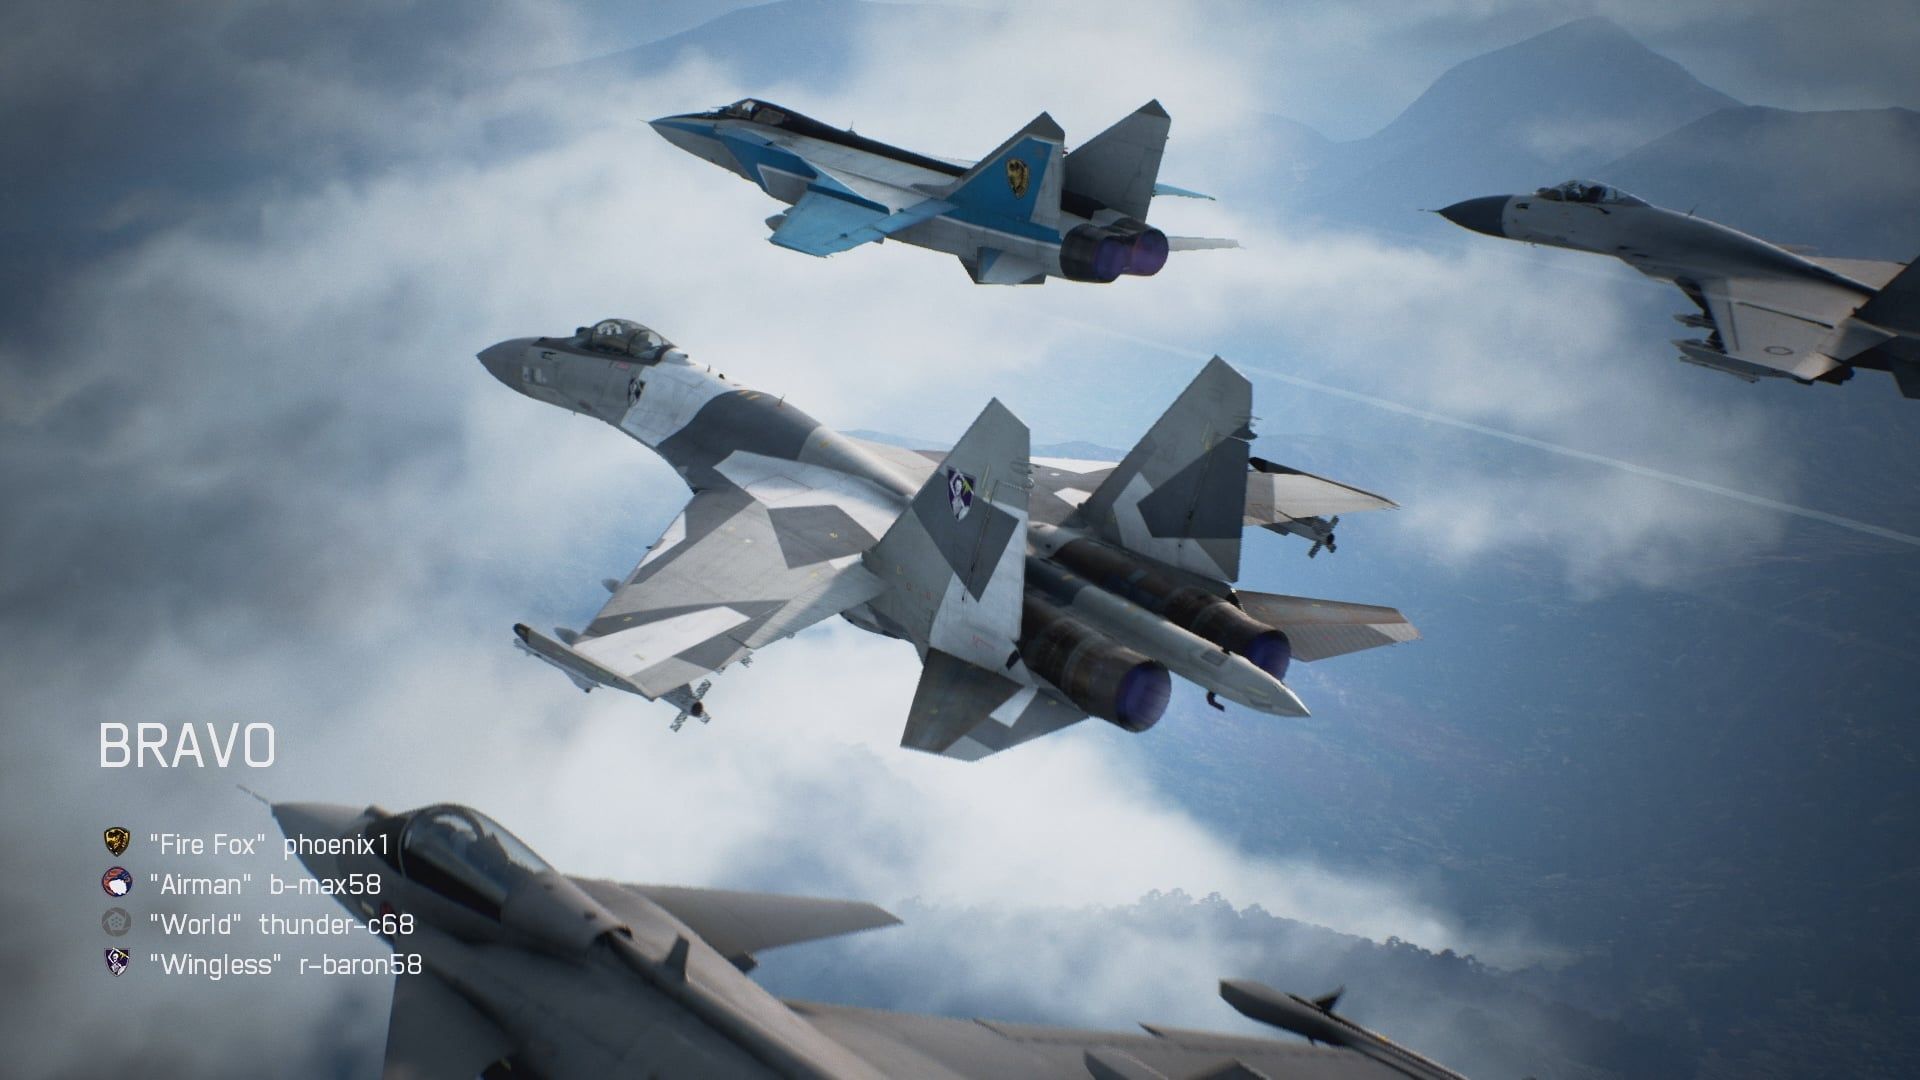 Ace Combat, Ace Combat 7, Ace Combat 7: Skies Unknown, Ace Combat The Symphony, Bandai Namco Entertainment, PC, Project Aces, PS4, Xbox One